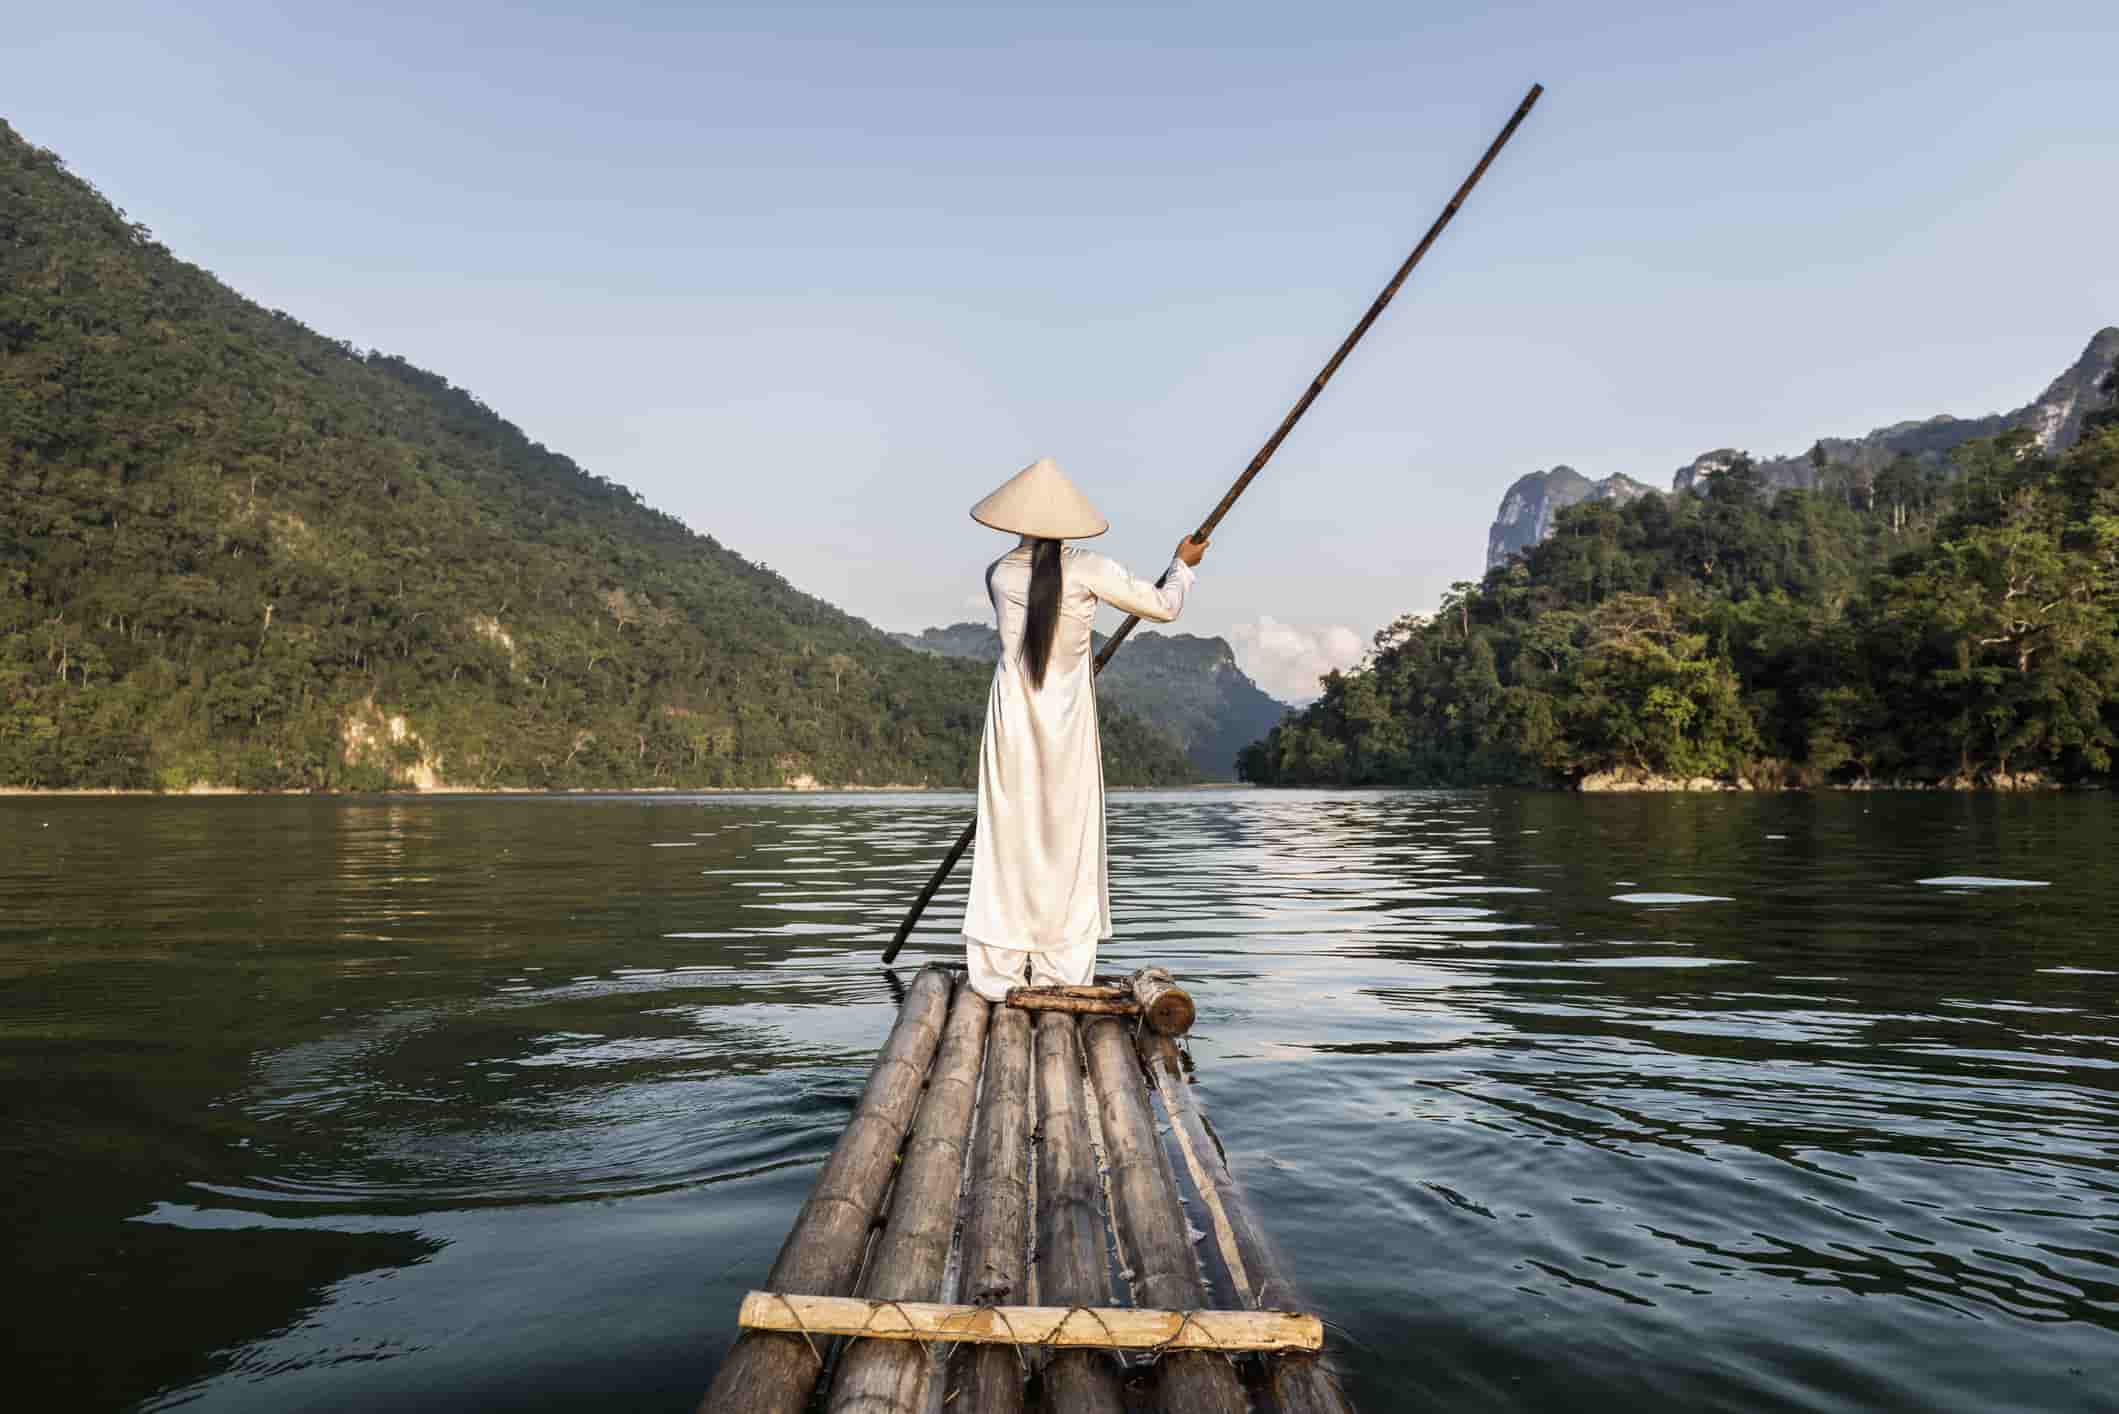 young woman sailing across a lake in Vietnam